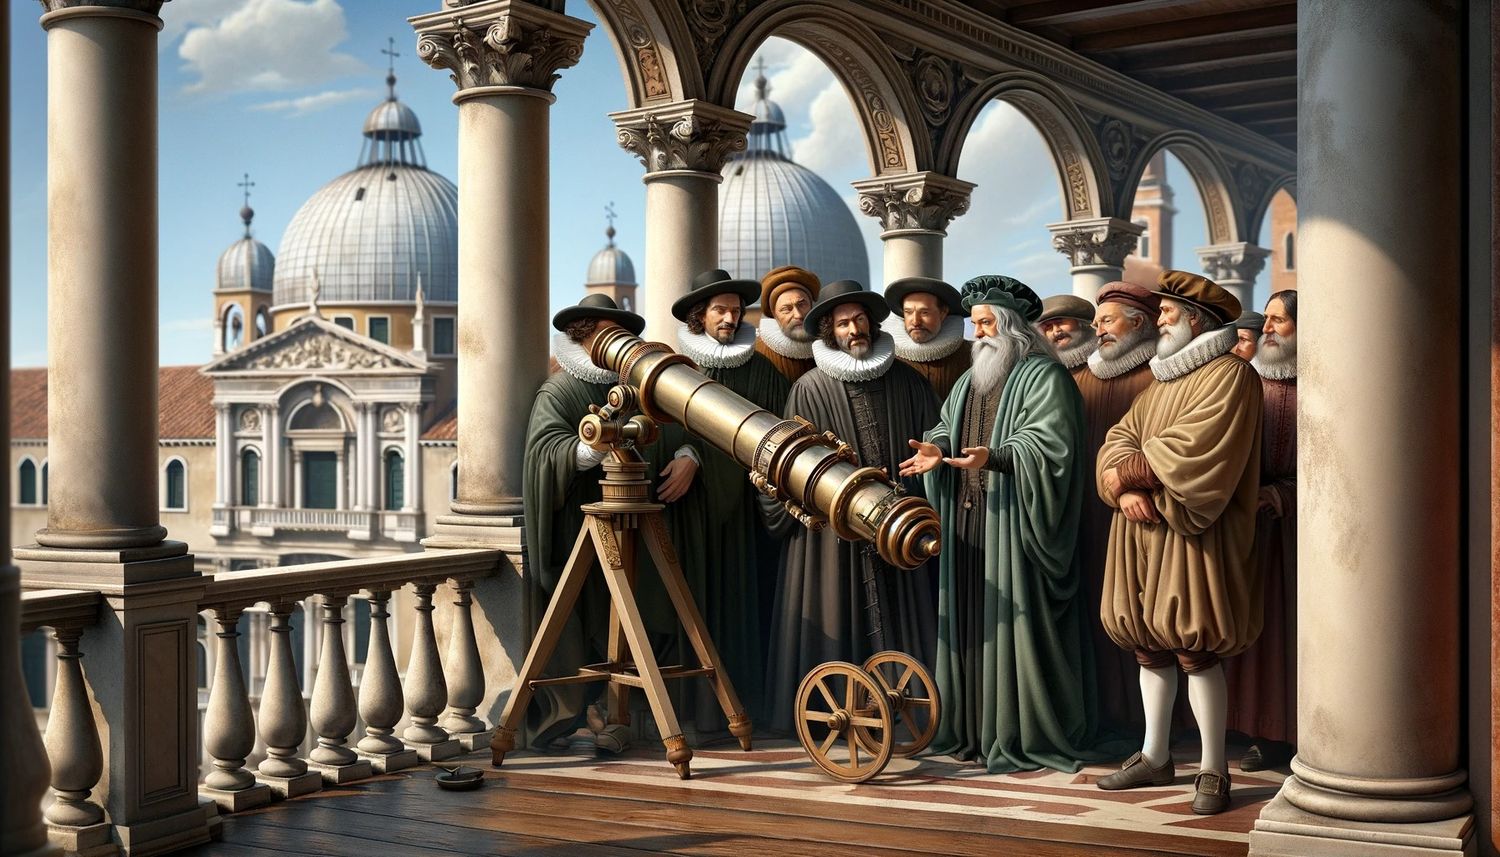 How Did The Conflict With Galileo Between Science And Catholicism End?